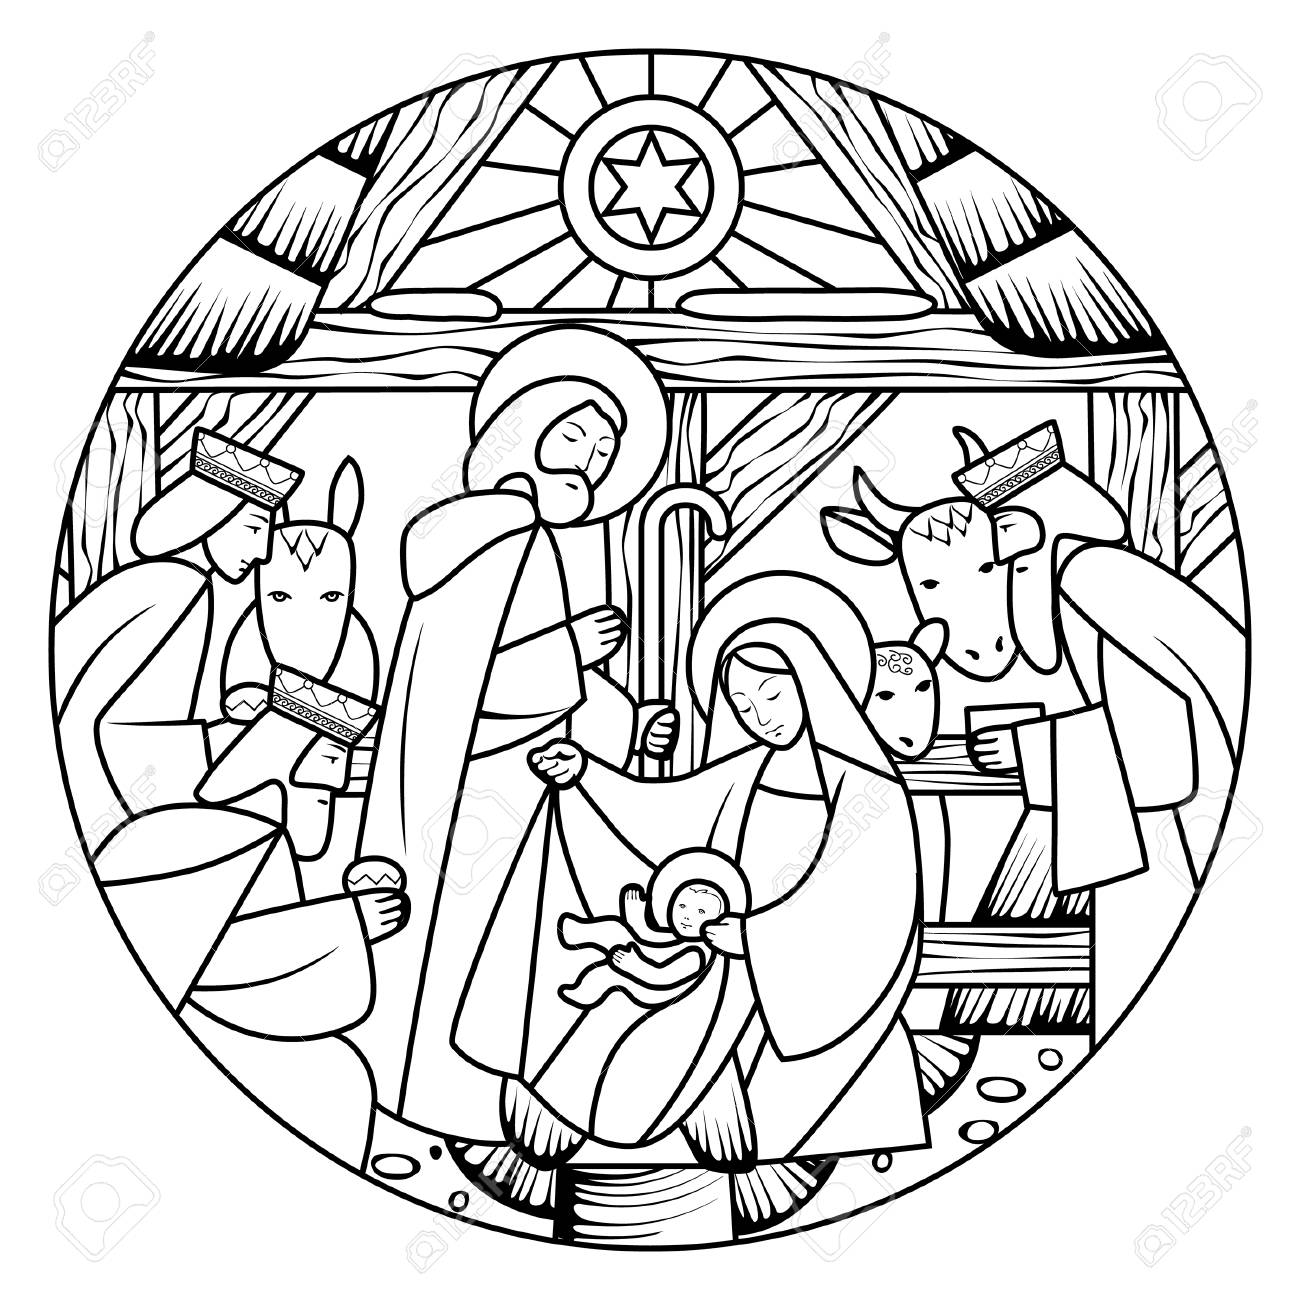 Birth of jesus christ scene in circle shape linear drawing for coloring book vector illustration royalty free svg cliparts vectors and stock illustration image